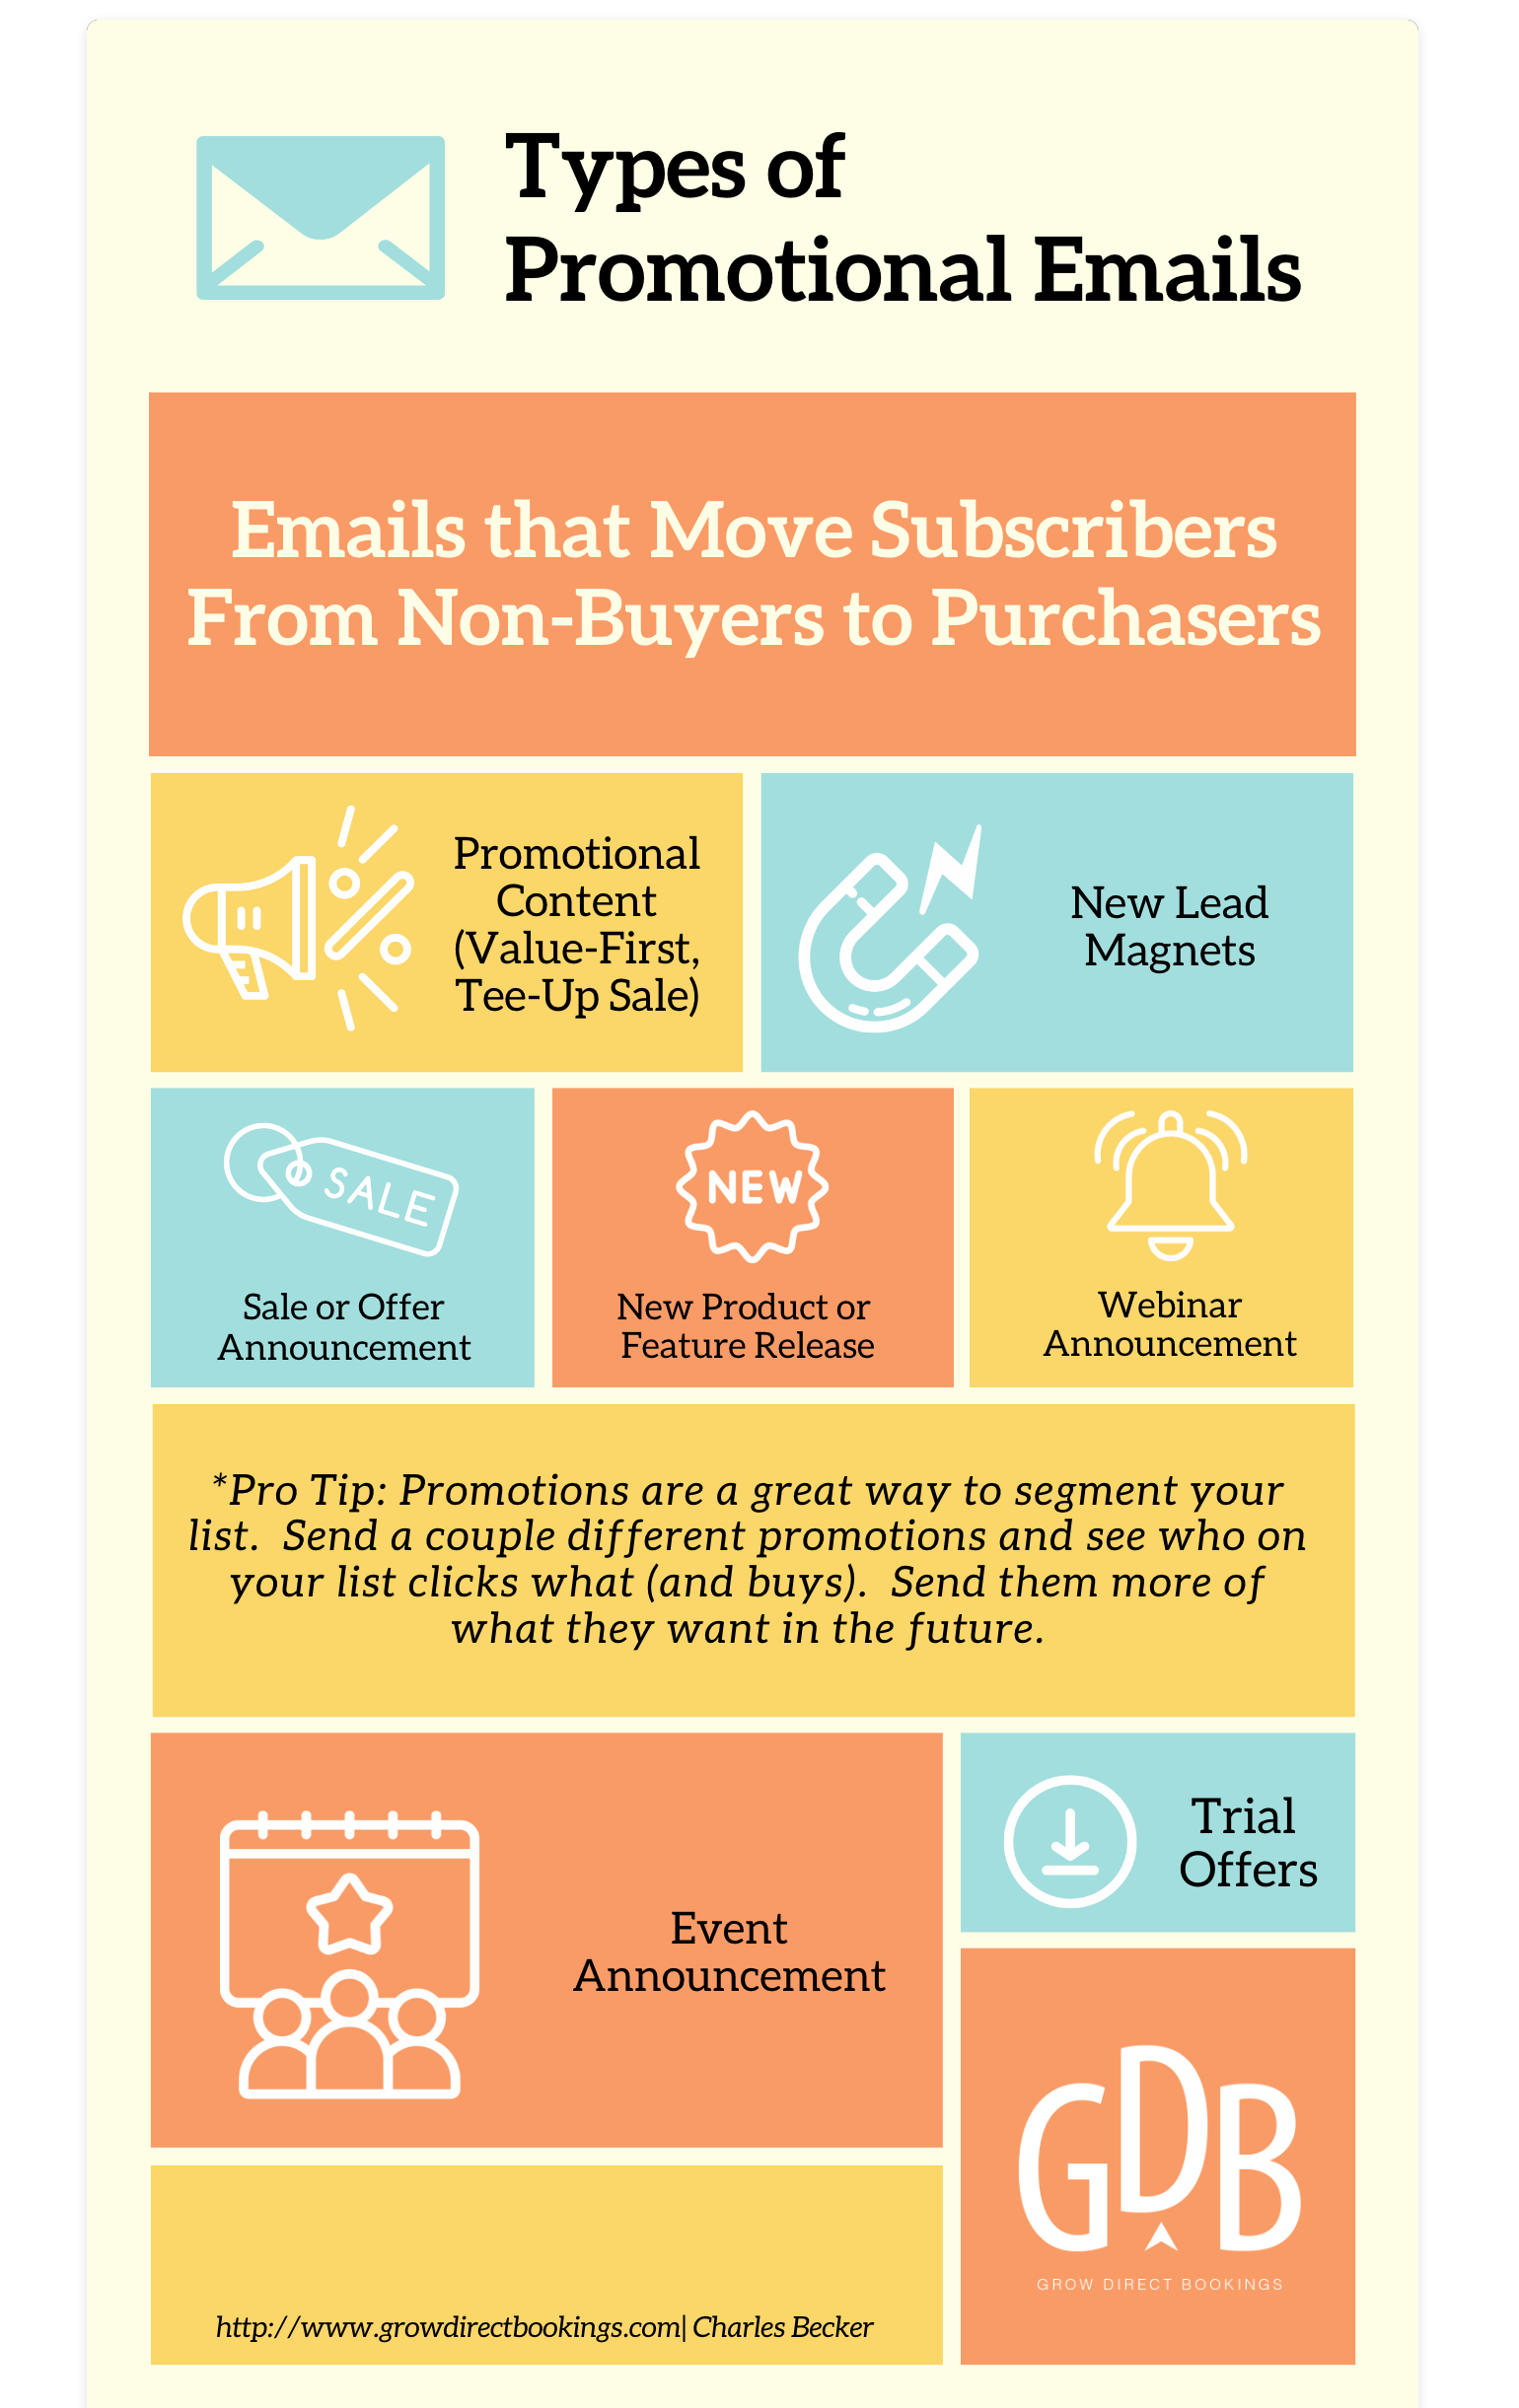 Types of Promotional Emails